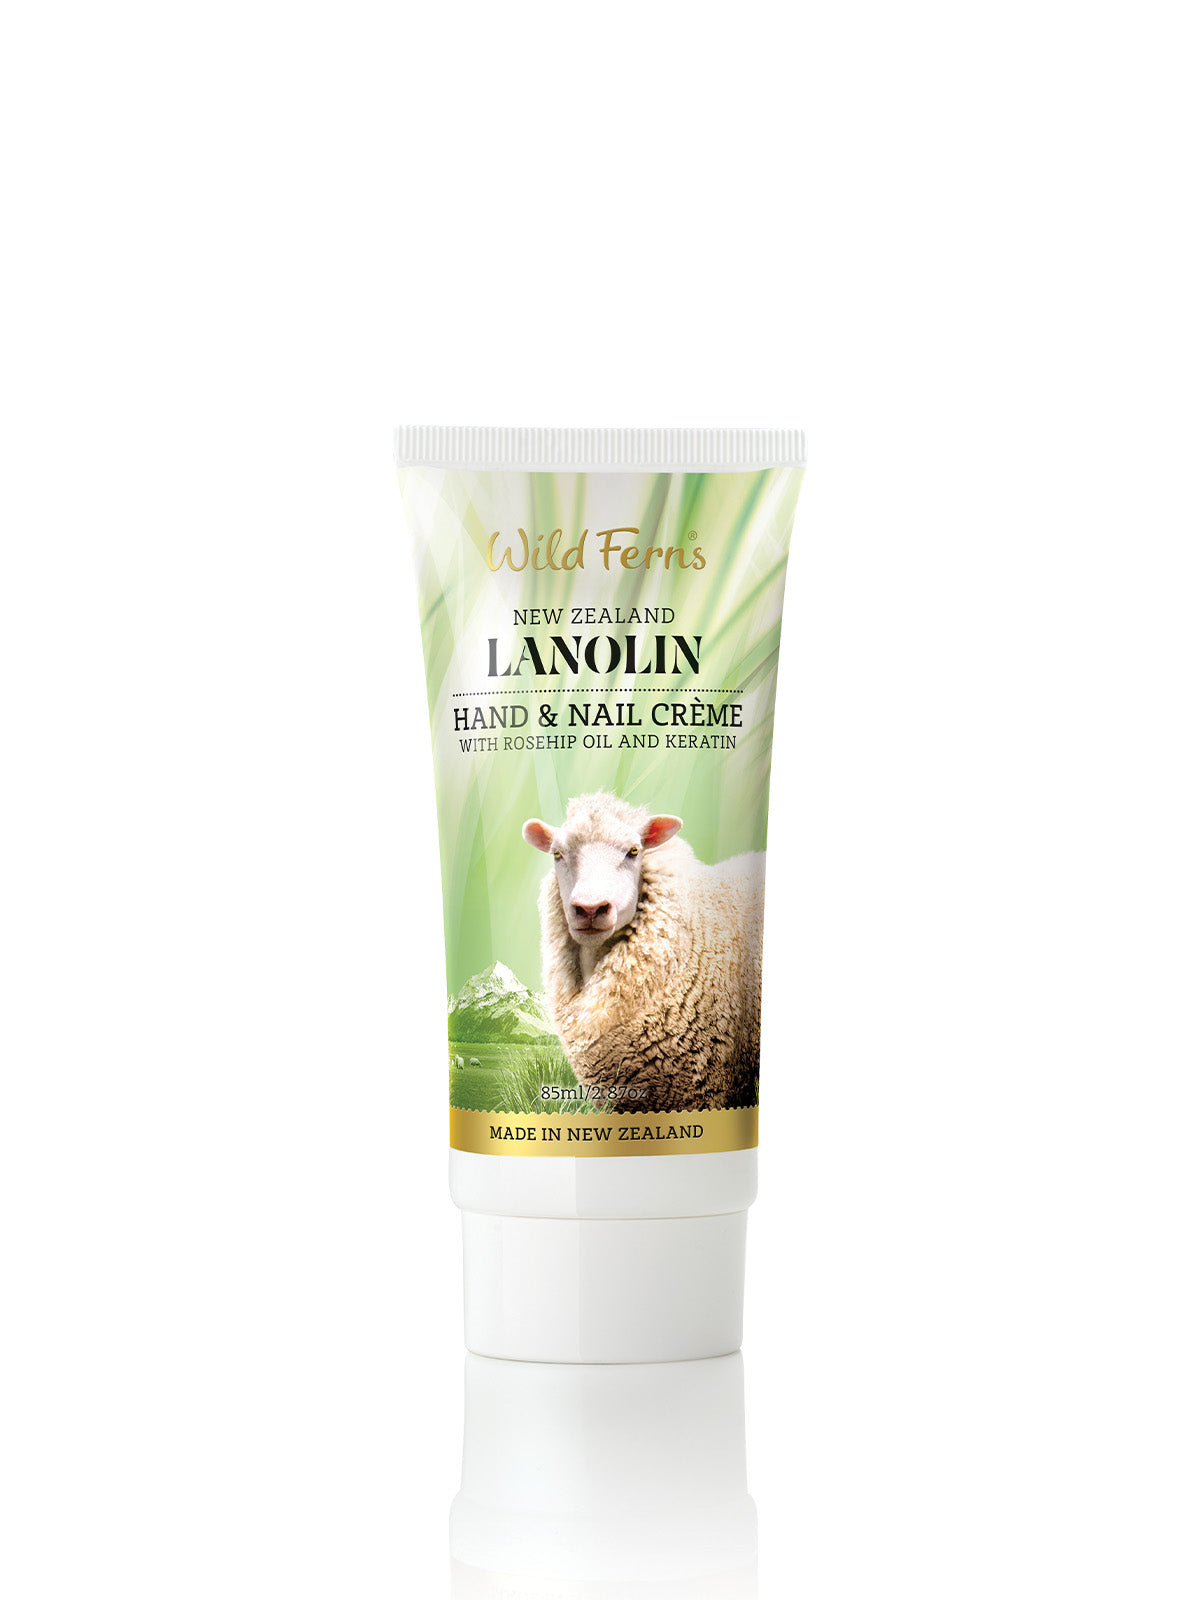 Wild Ferns Lanolin Hand and Nail Crème with Rose Hip and Keratin, 85ml - Main Image